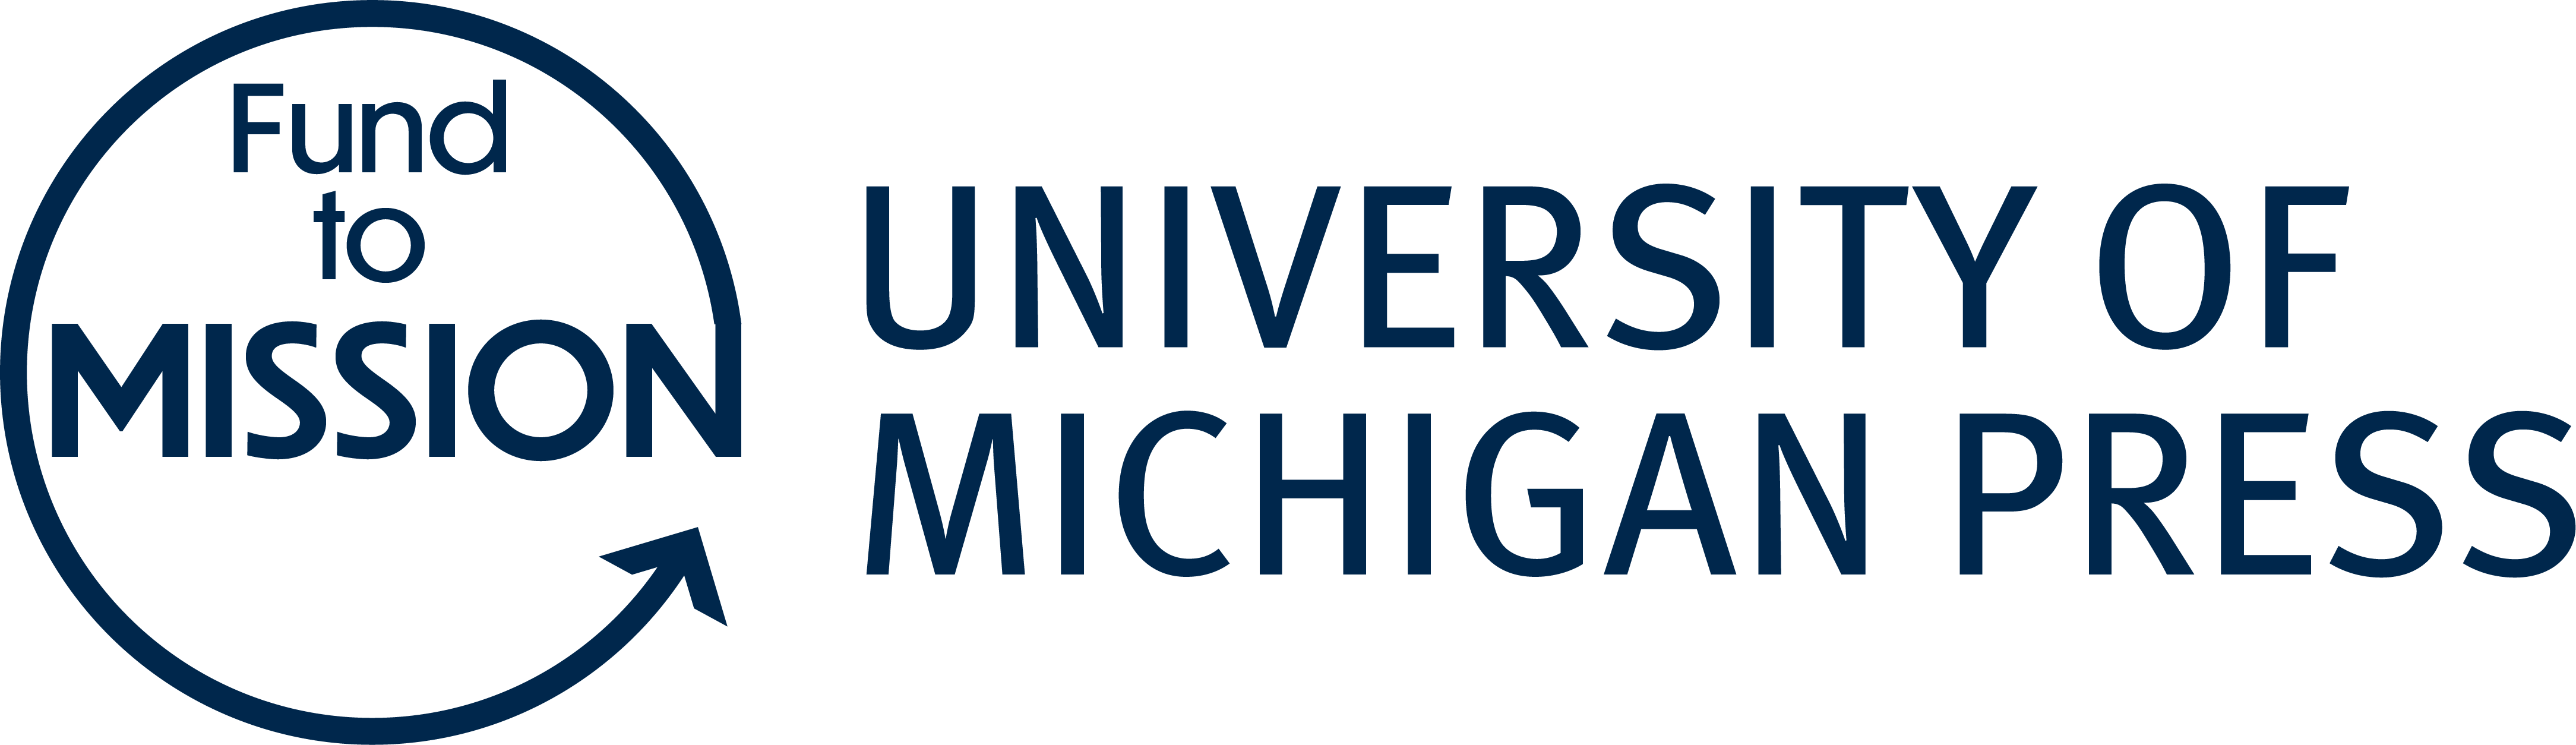 Fund to Mission in a circle with an arrow next to the text University of Michigan Press